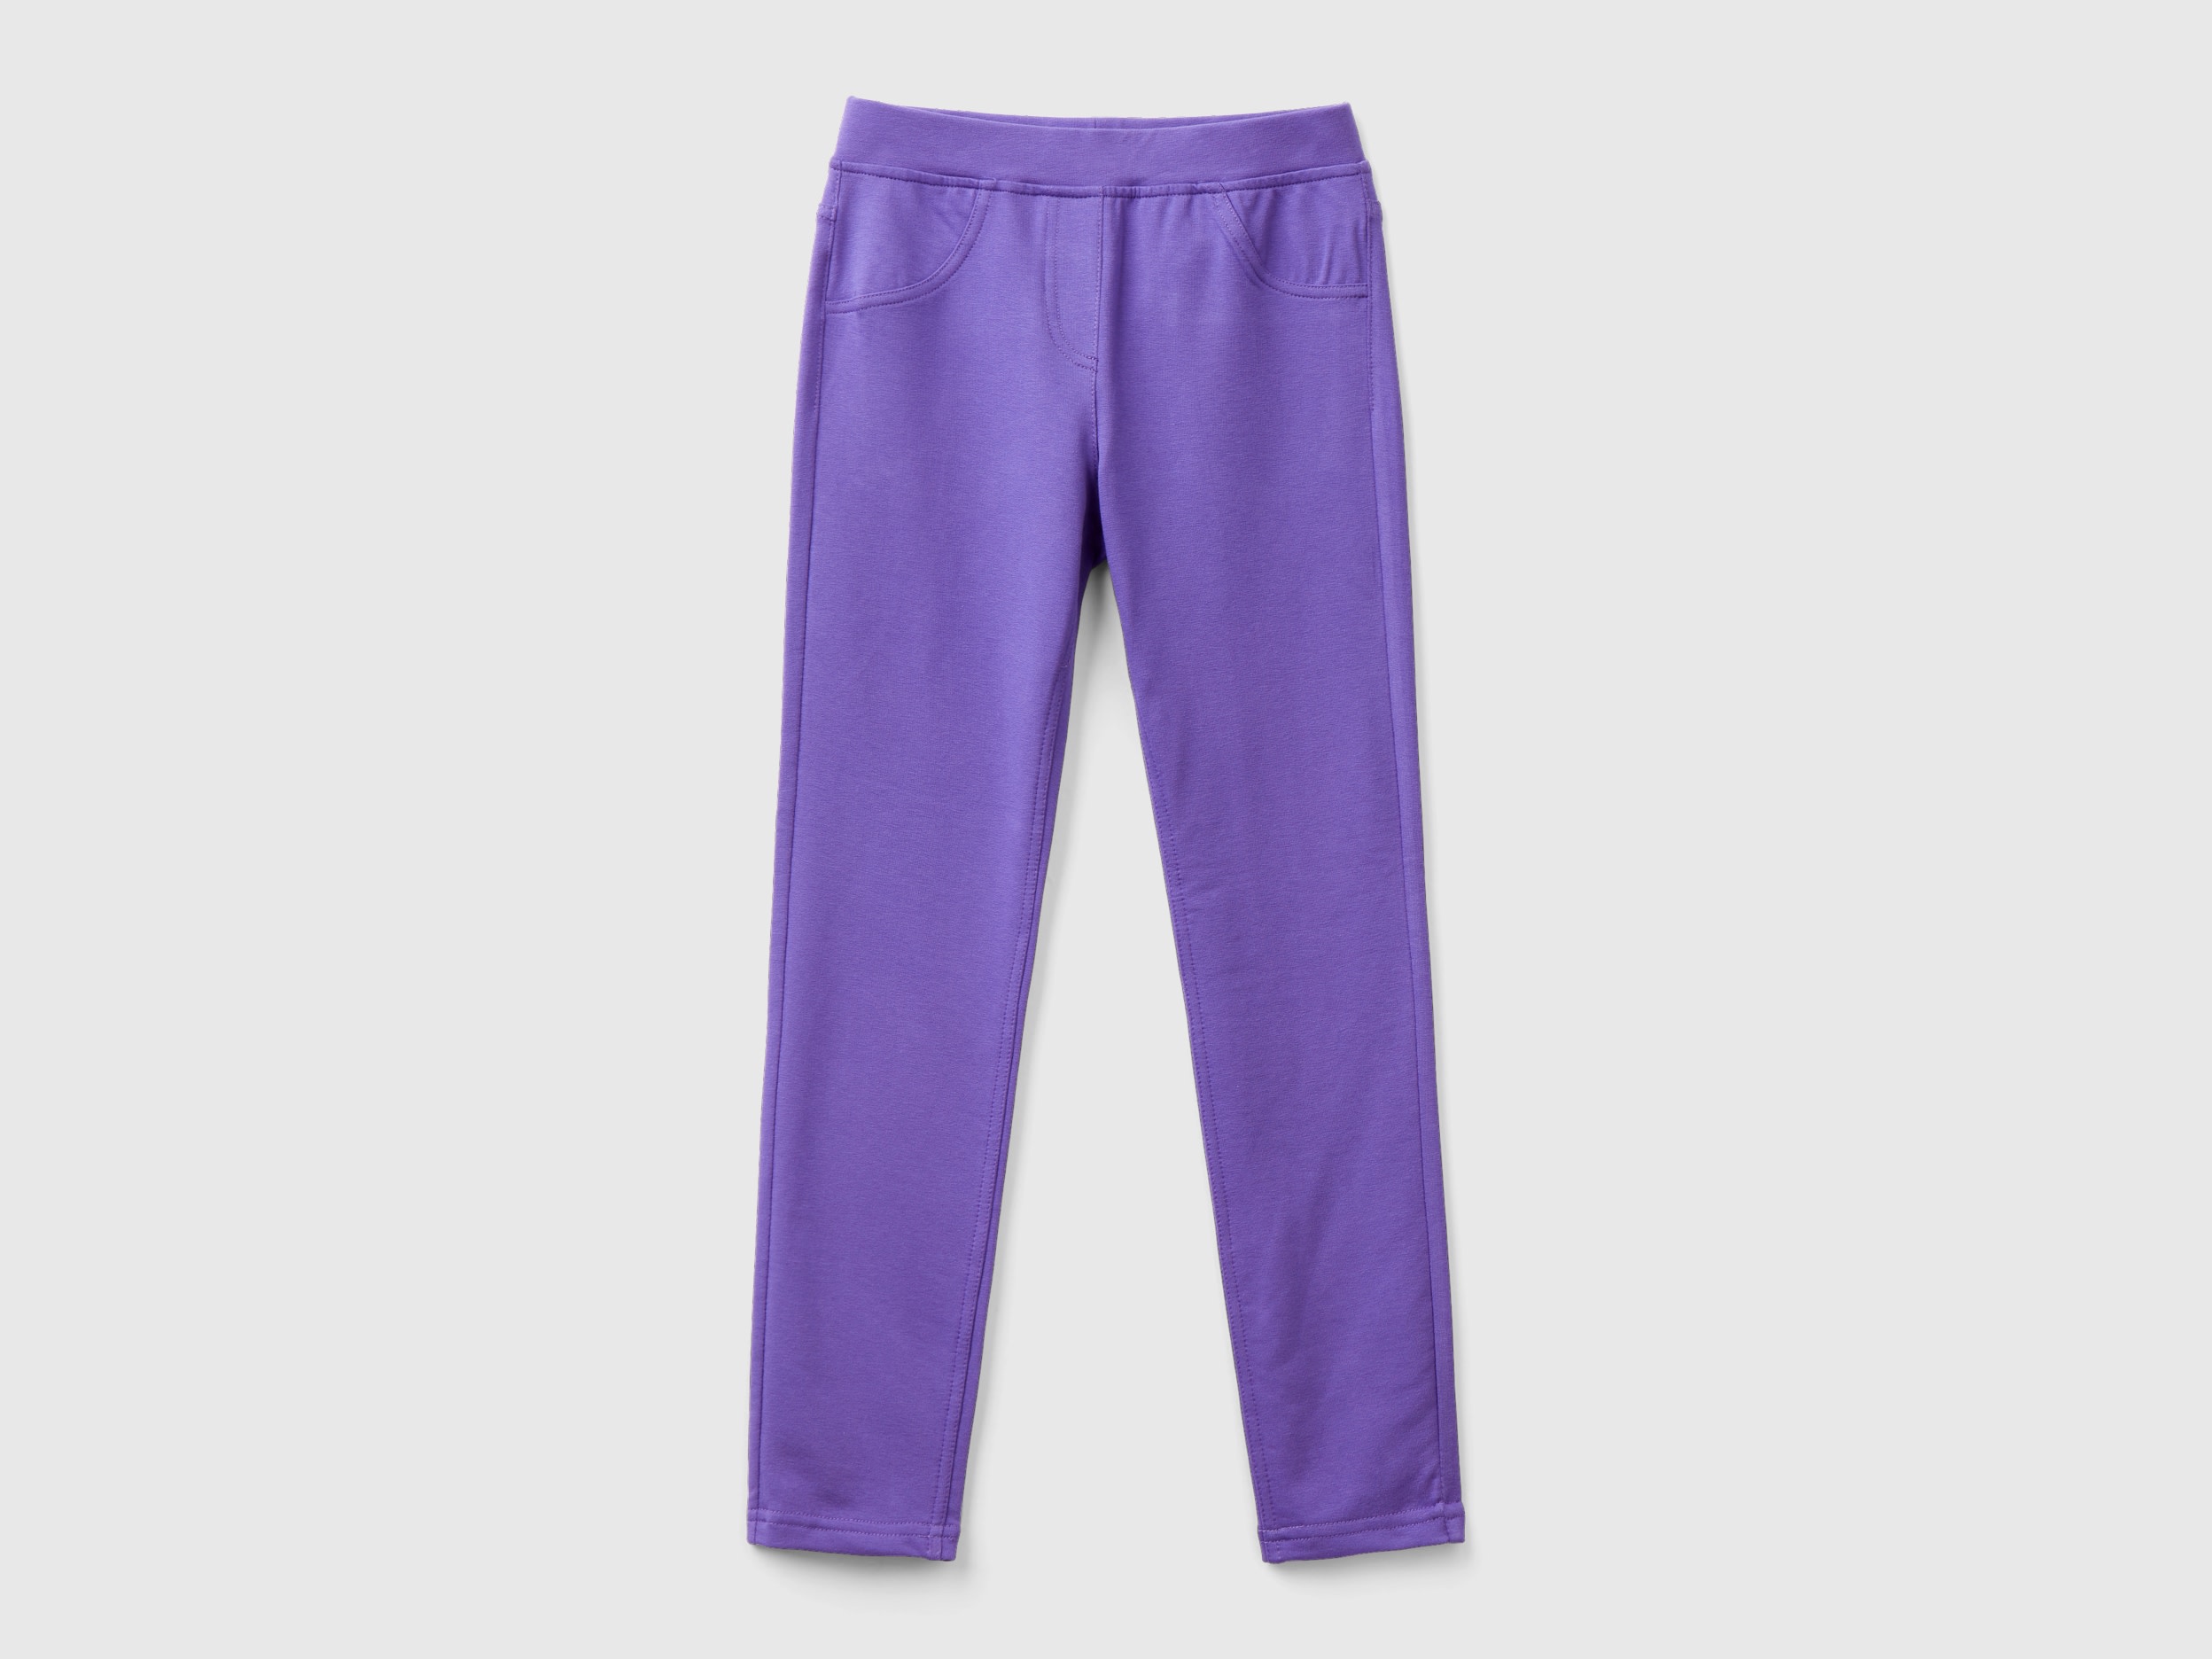 Benetton, Stretch Sweat Fabric Jeggings, size S, Violet, Kids